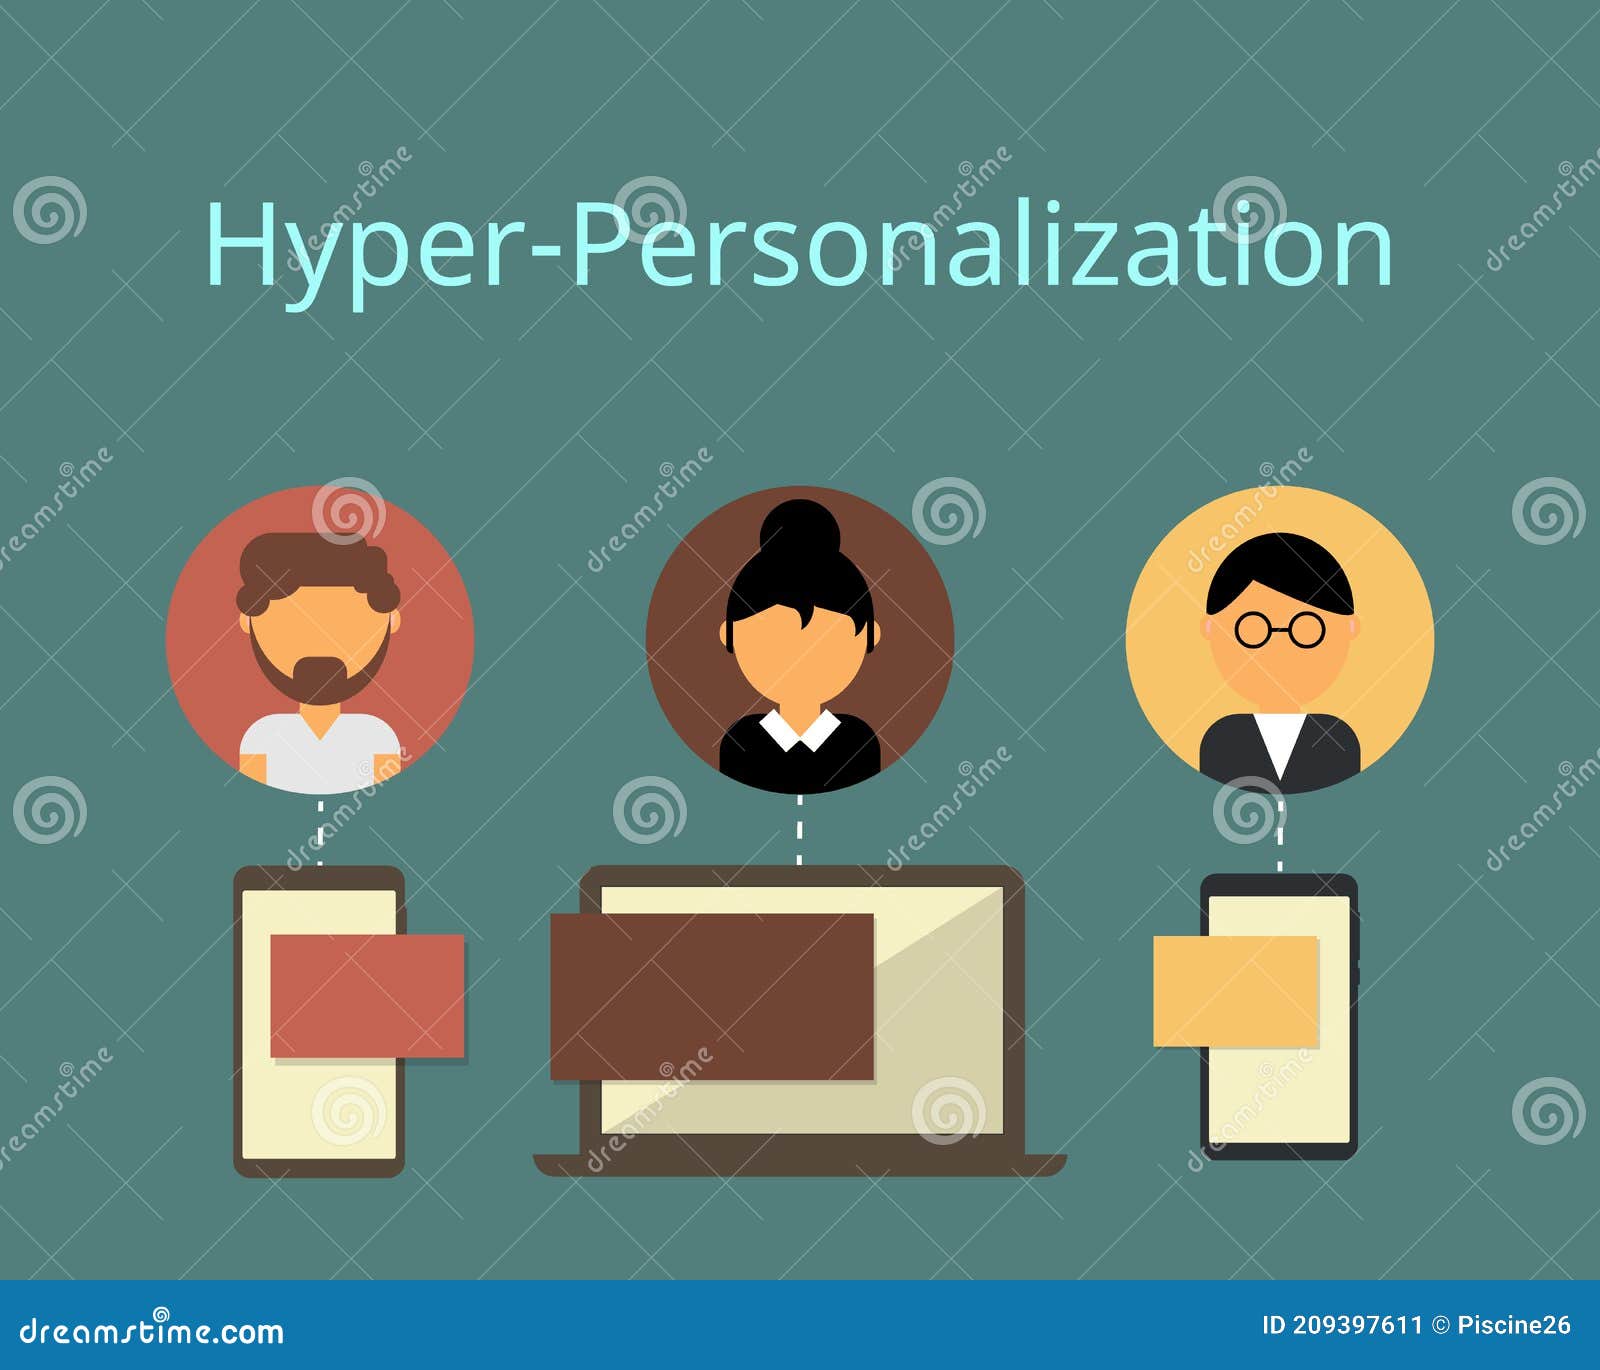 hyper-personalized marketing to make customers satisfied with the level of personalization they receive from brands.